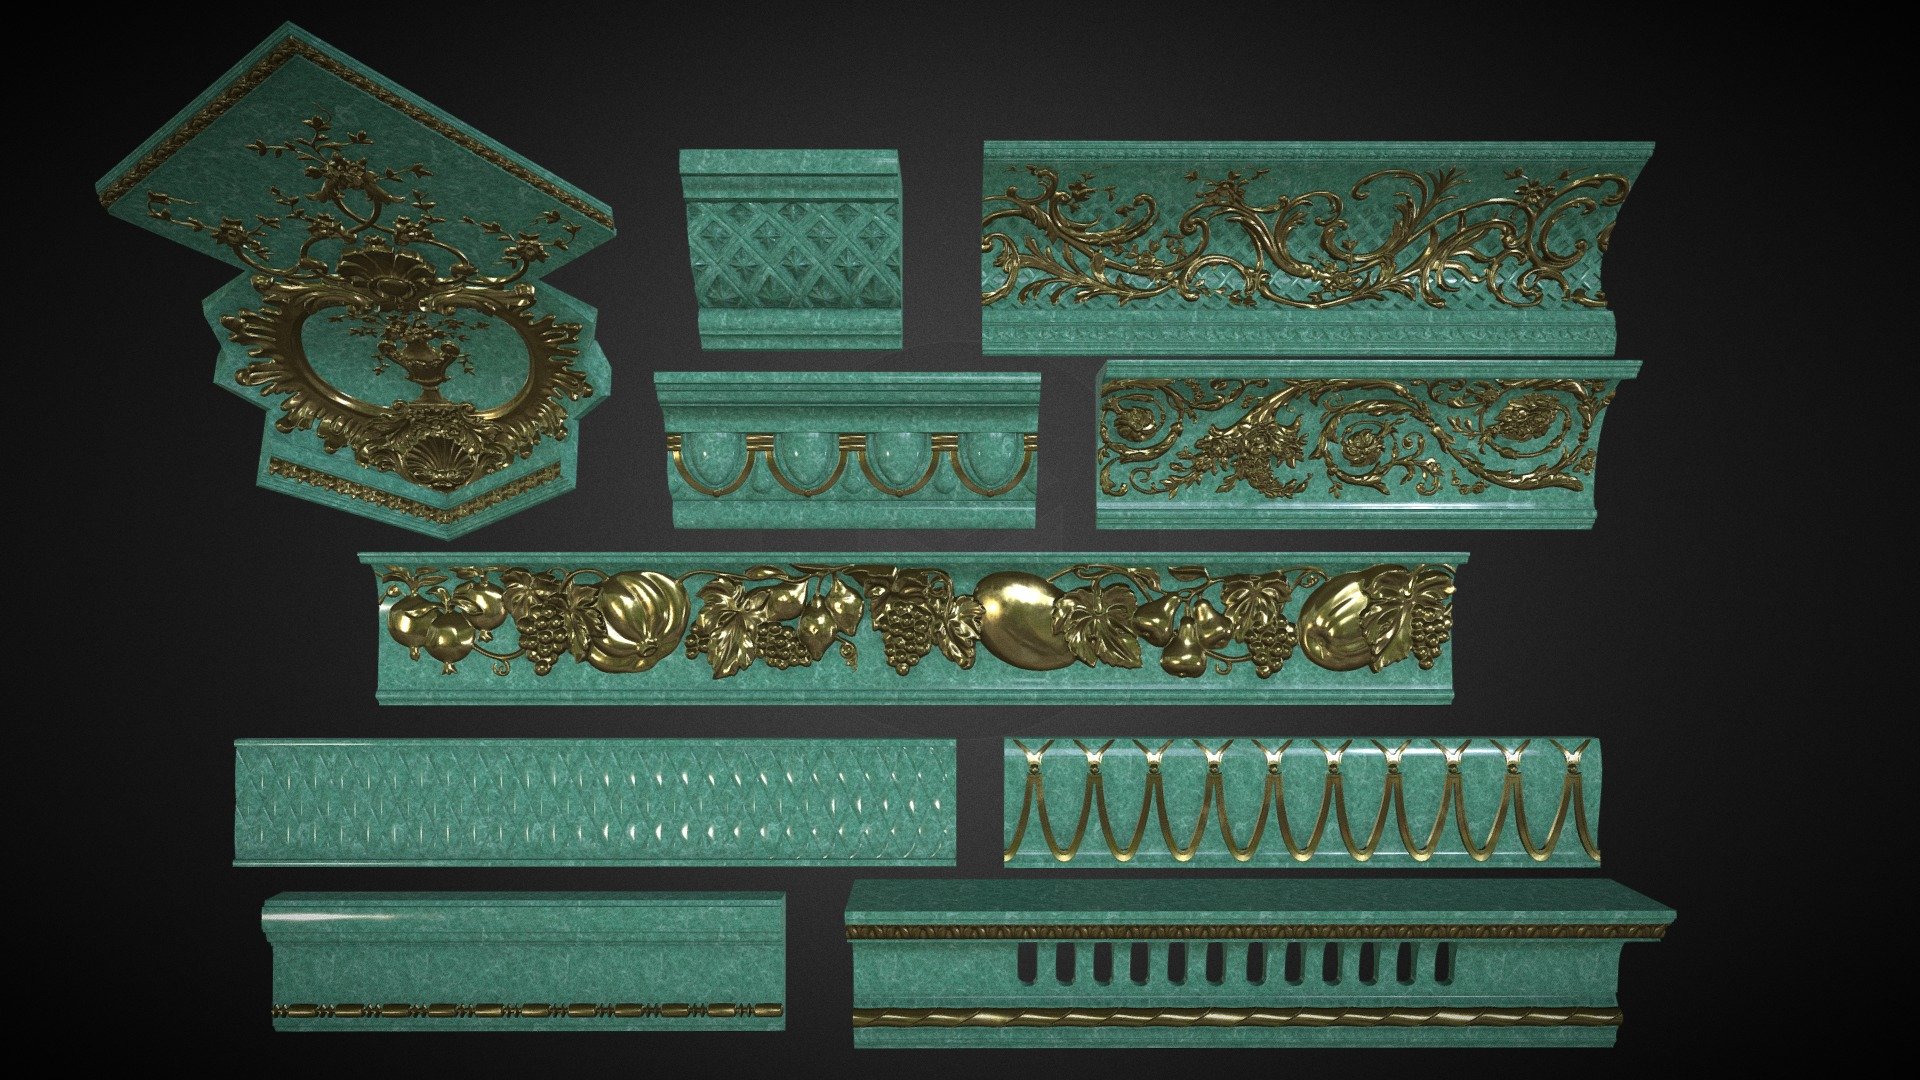 Get pack - https://www.artstation.com/a/18699841

10 textured middle poly cornices for architectural visualization








Rendered 3ds max Vray







without UV







3 type of textures white marble, green marble and gold







3 tilling textures(4096x4096)(PBR - BaseColor, Metallic, Normal, Roughness and Specular/Glossiness - Diffuse, Glossiness, Normal, Specular)







HDRI map (.exr)







There are max(2017), blend (2.8) , FBX , OBJ and STL files.








some objects are triangulated (ZBrush Decimation Master)




cornice_00 - 83810  vert 



cornice_01 - 113960 vert 

cornice_02 - 106232 vert 

cornice_03 - 56533  vert 

cornice_04 - 14759  vert 

cornice_05 - 40454  vert 

cornice_06 - 25157  vert

cornice_07 - 3055   vert  

cornice_08 - 49607  vert 

cornice_09 - 20188  vert


 - Middle Poly Cornices-Collection 2 - 10 pieces - 3D model by 3d.armzep 3d model